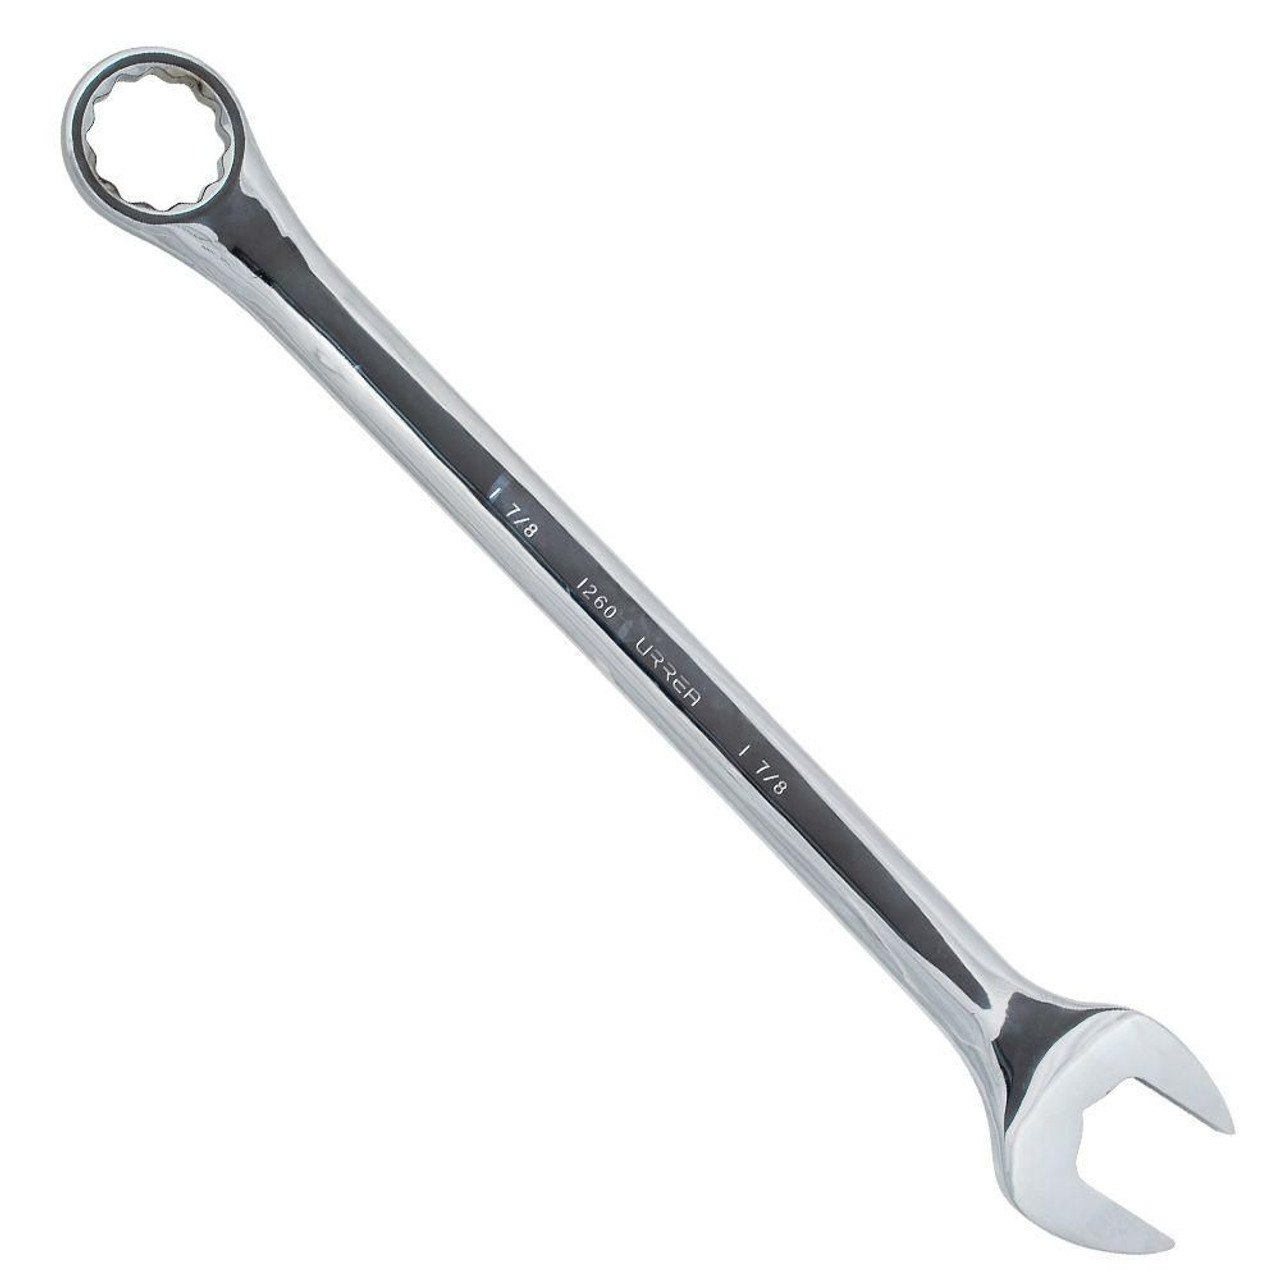 Full polished combination wrench, Size: 1-9/16, 12 point, Tool Length:&nbsp;23-1/8"